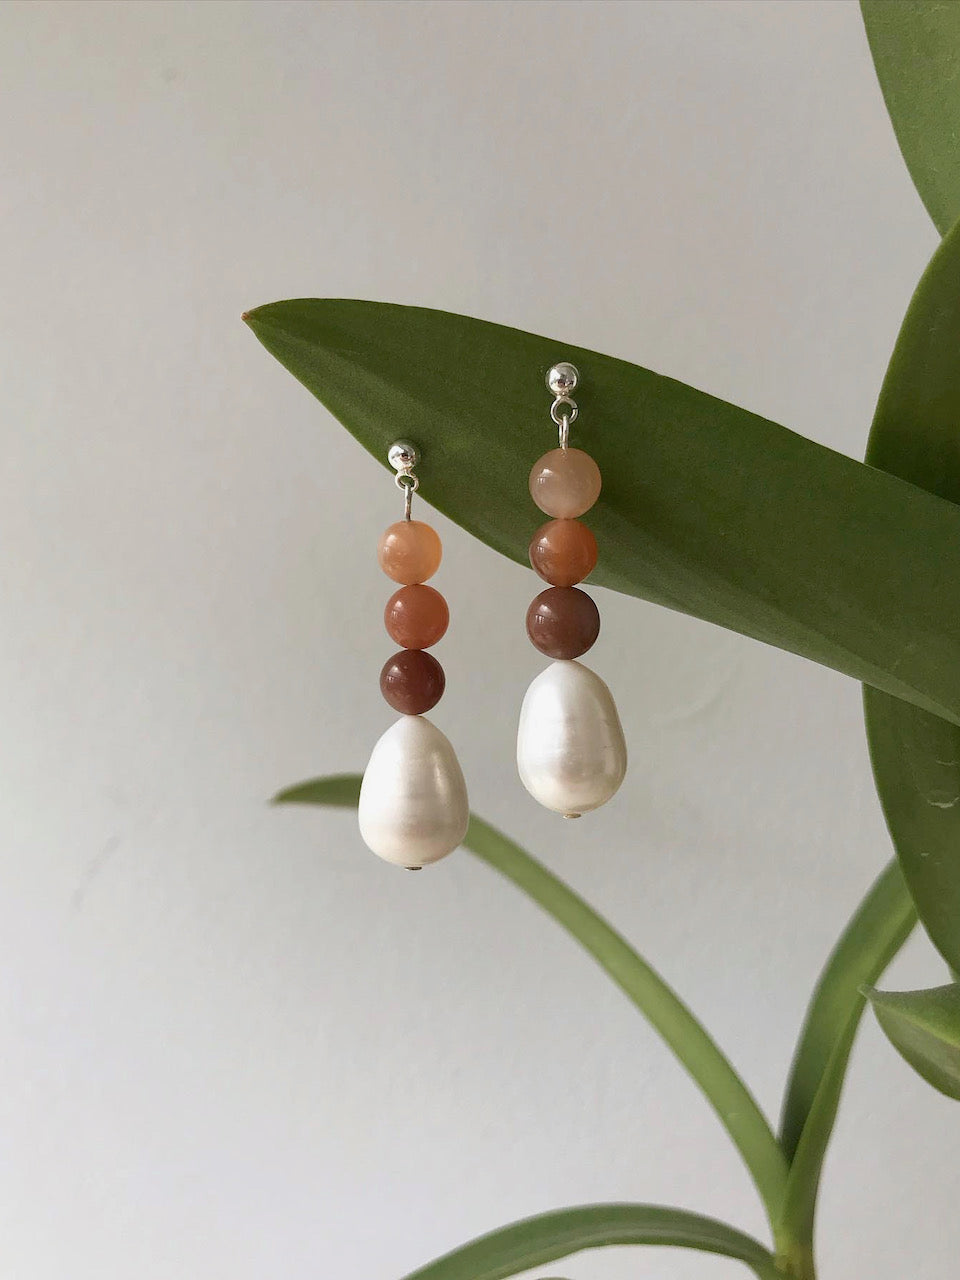 A pair of Horizon Drops earrings from Avara Studio with two pearls hanging from a plant.